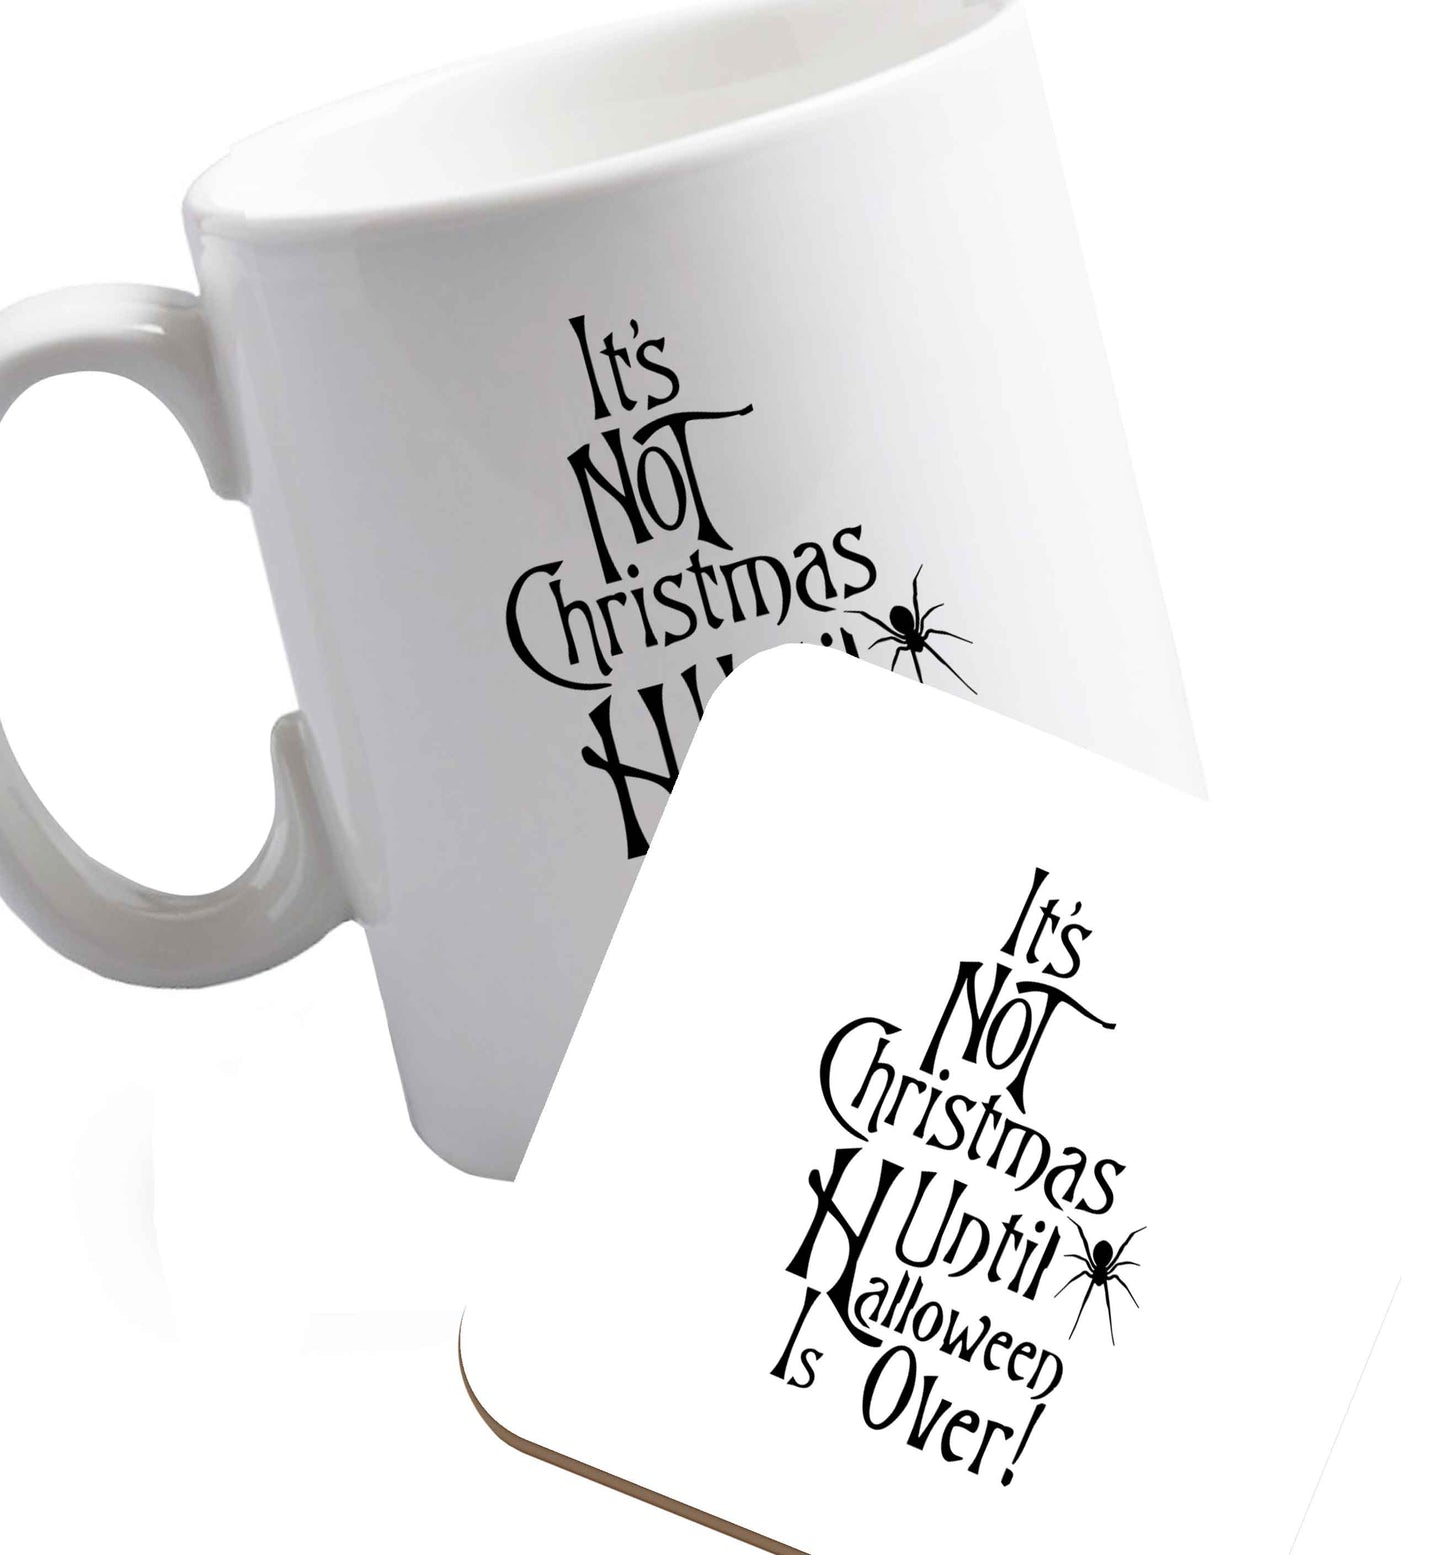 10 oz It's not Christmas until Halloween is over ceramic mug and coaster set right handed